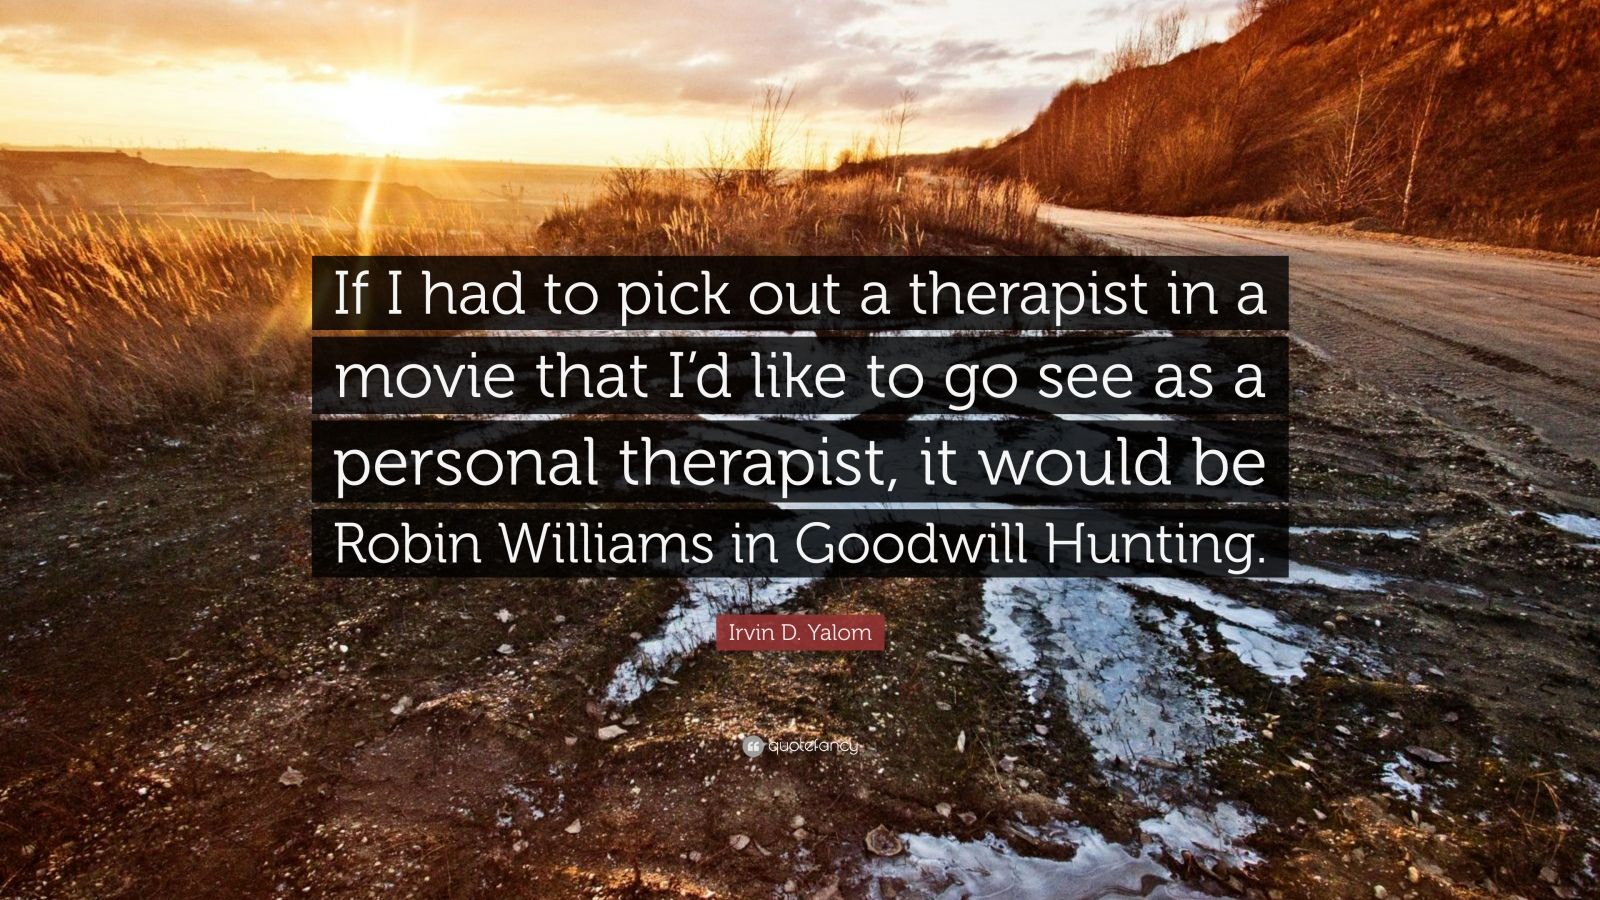 Irvin D Yalom Quote “If I had to pick out a therapist in